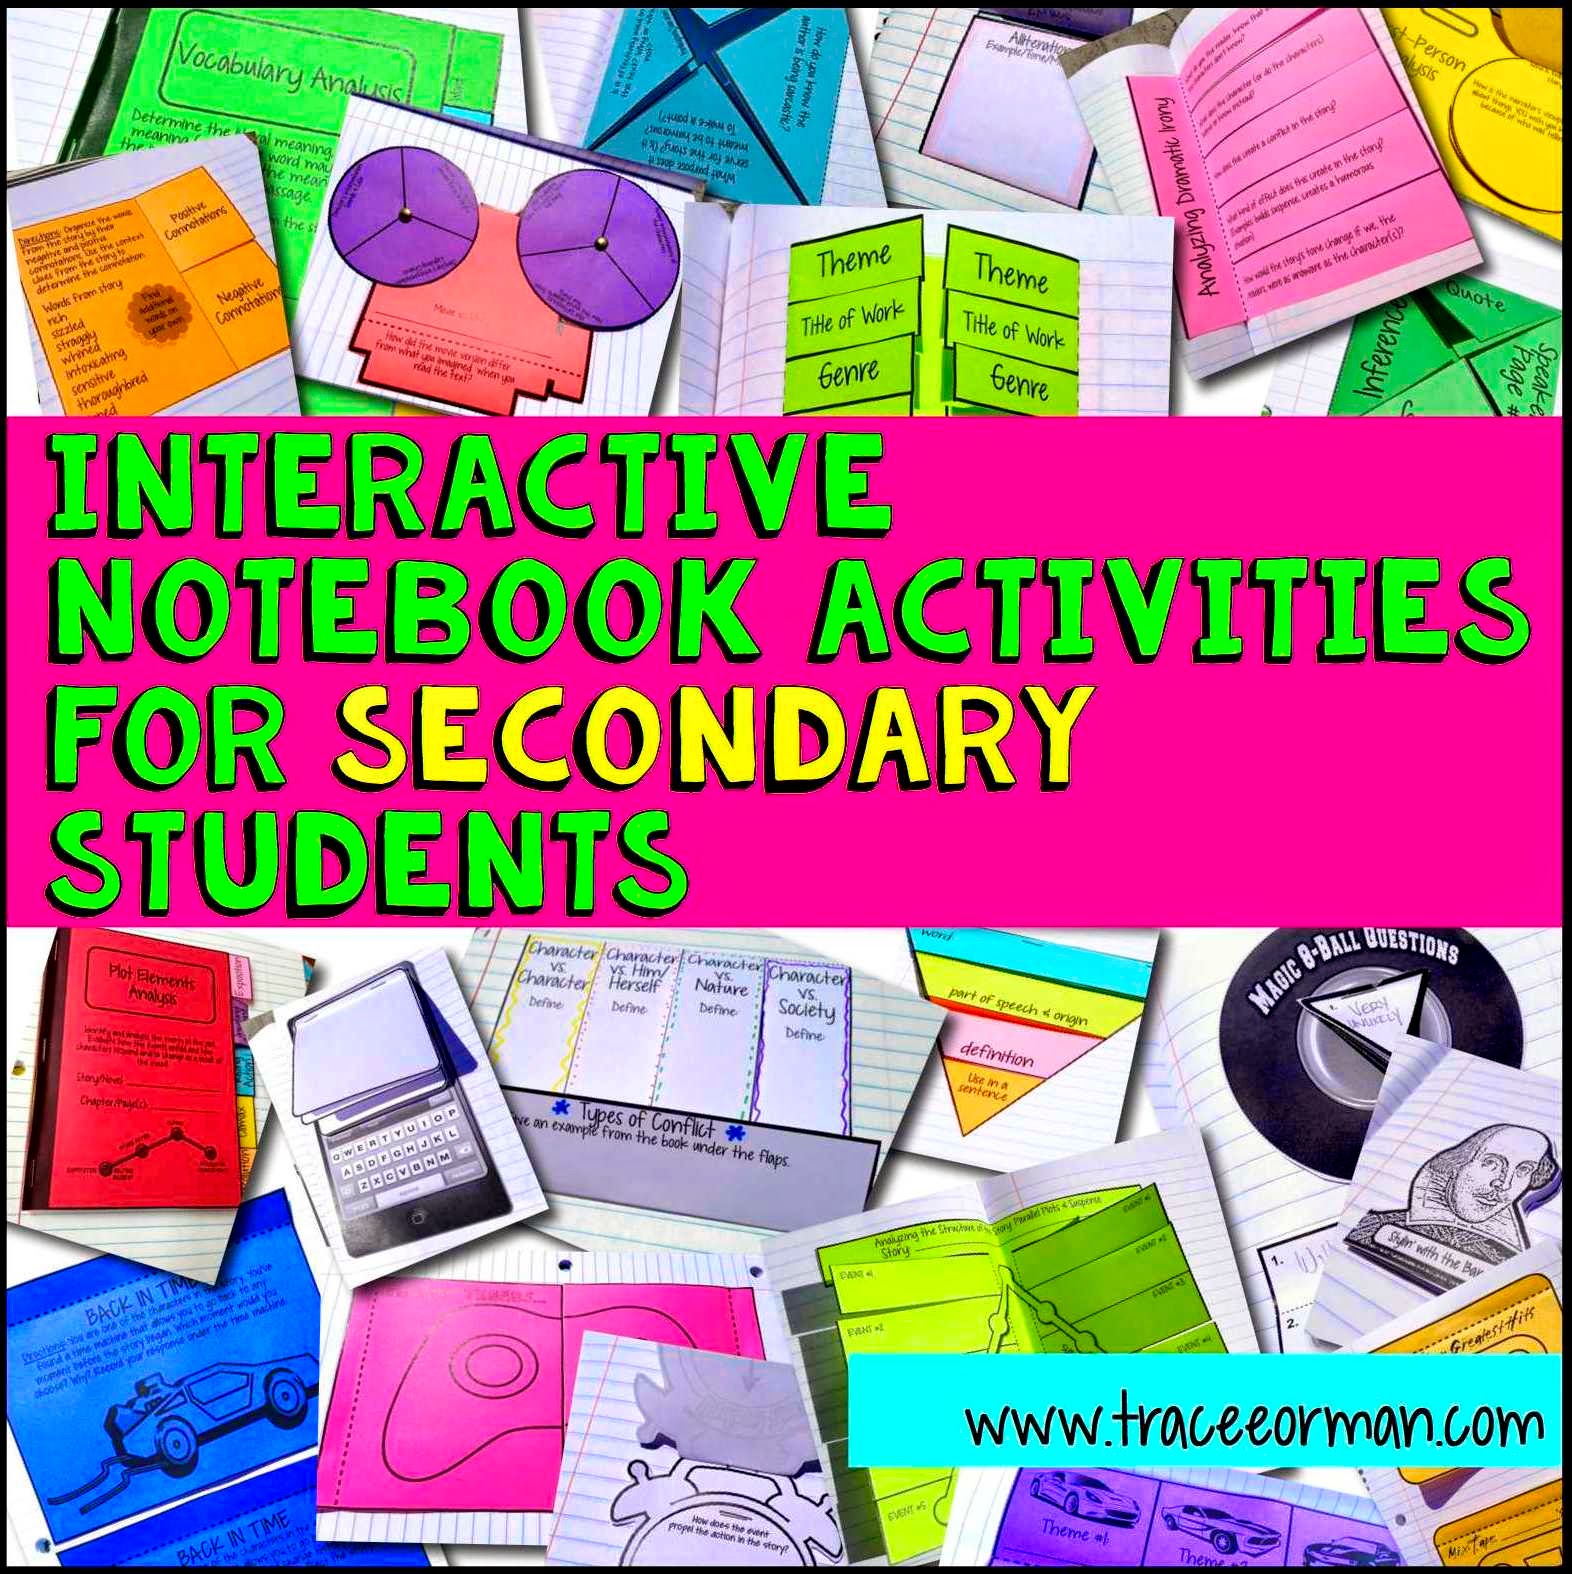 Mrs. Orman's Classroom: Interactive Notebook Examples and Templates